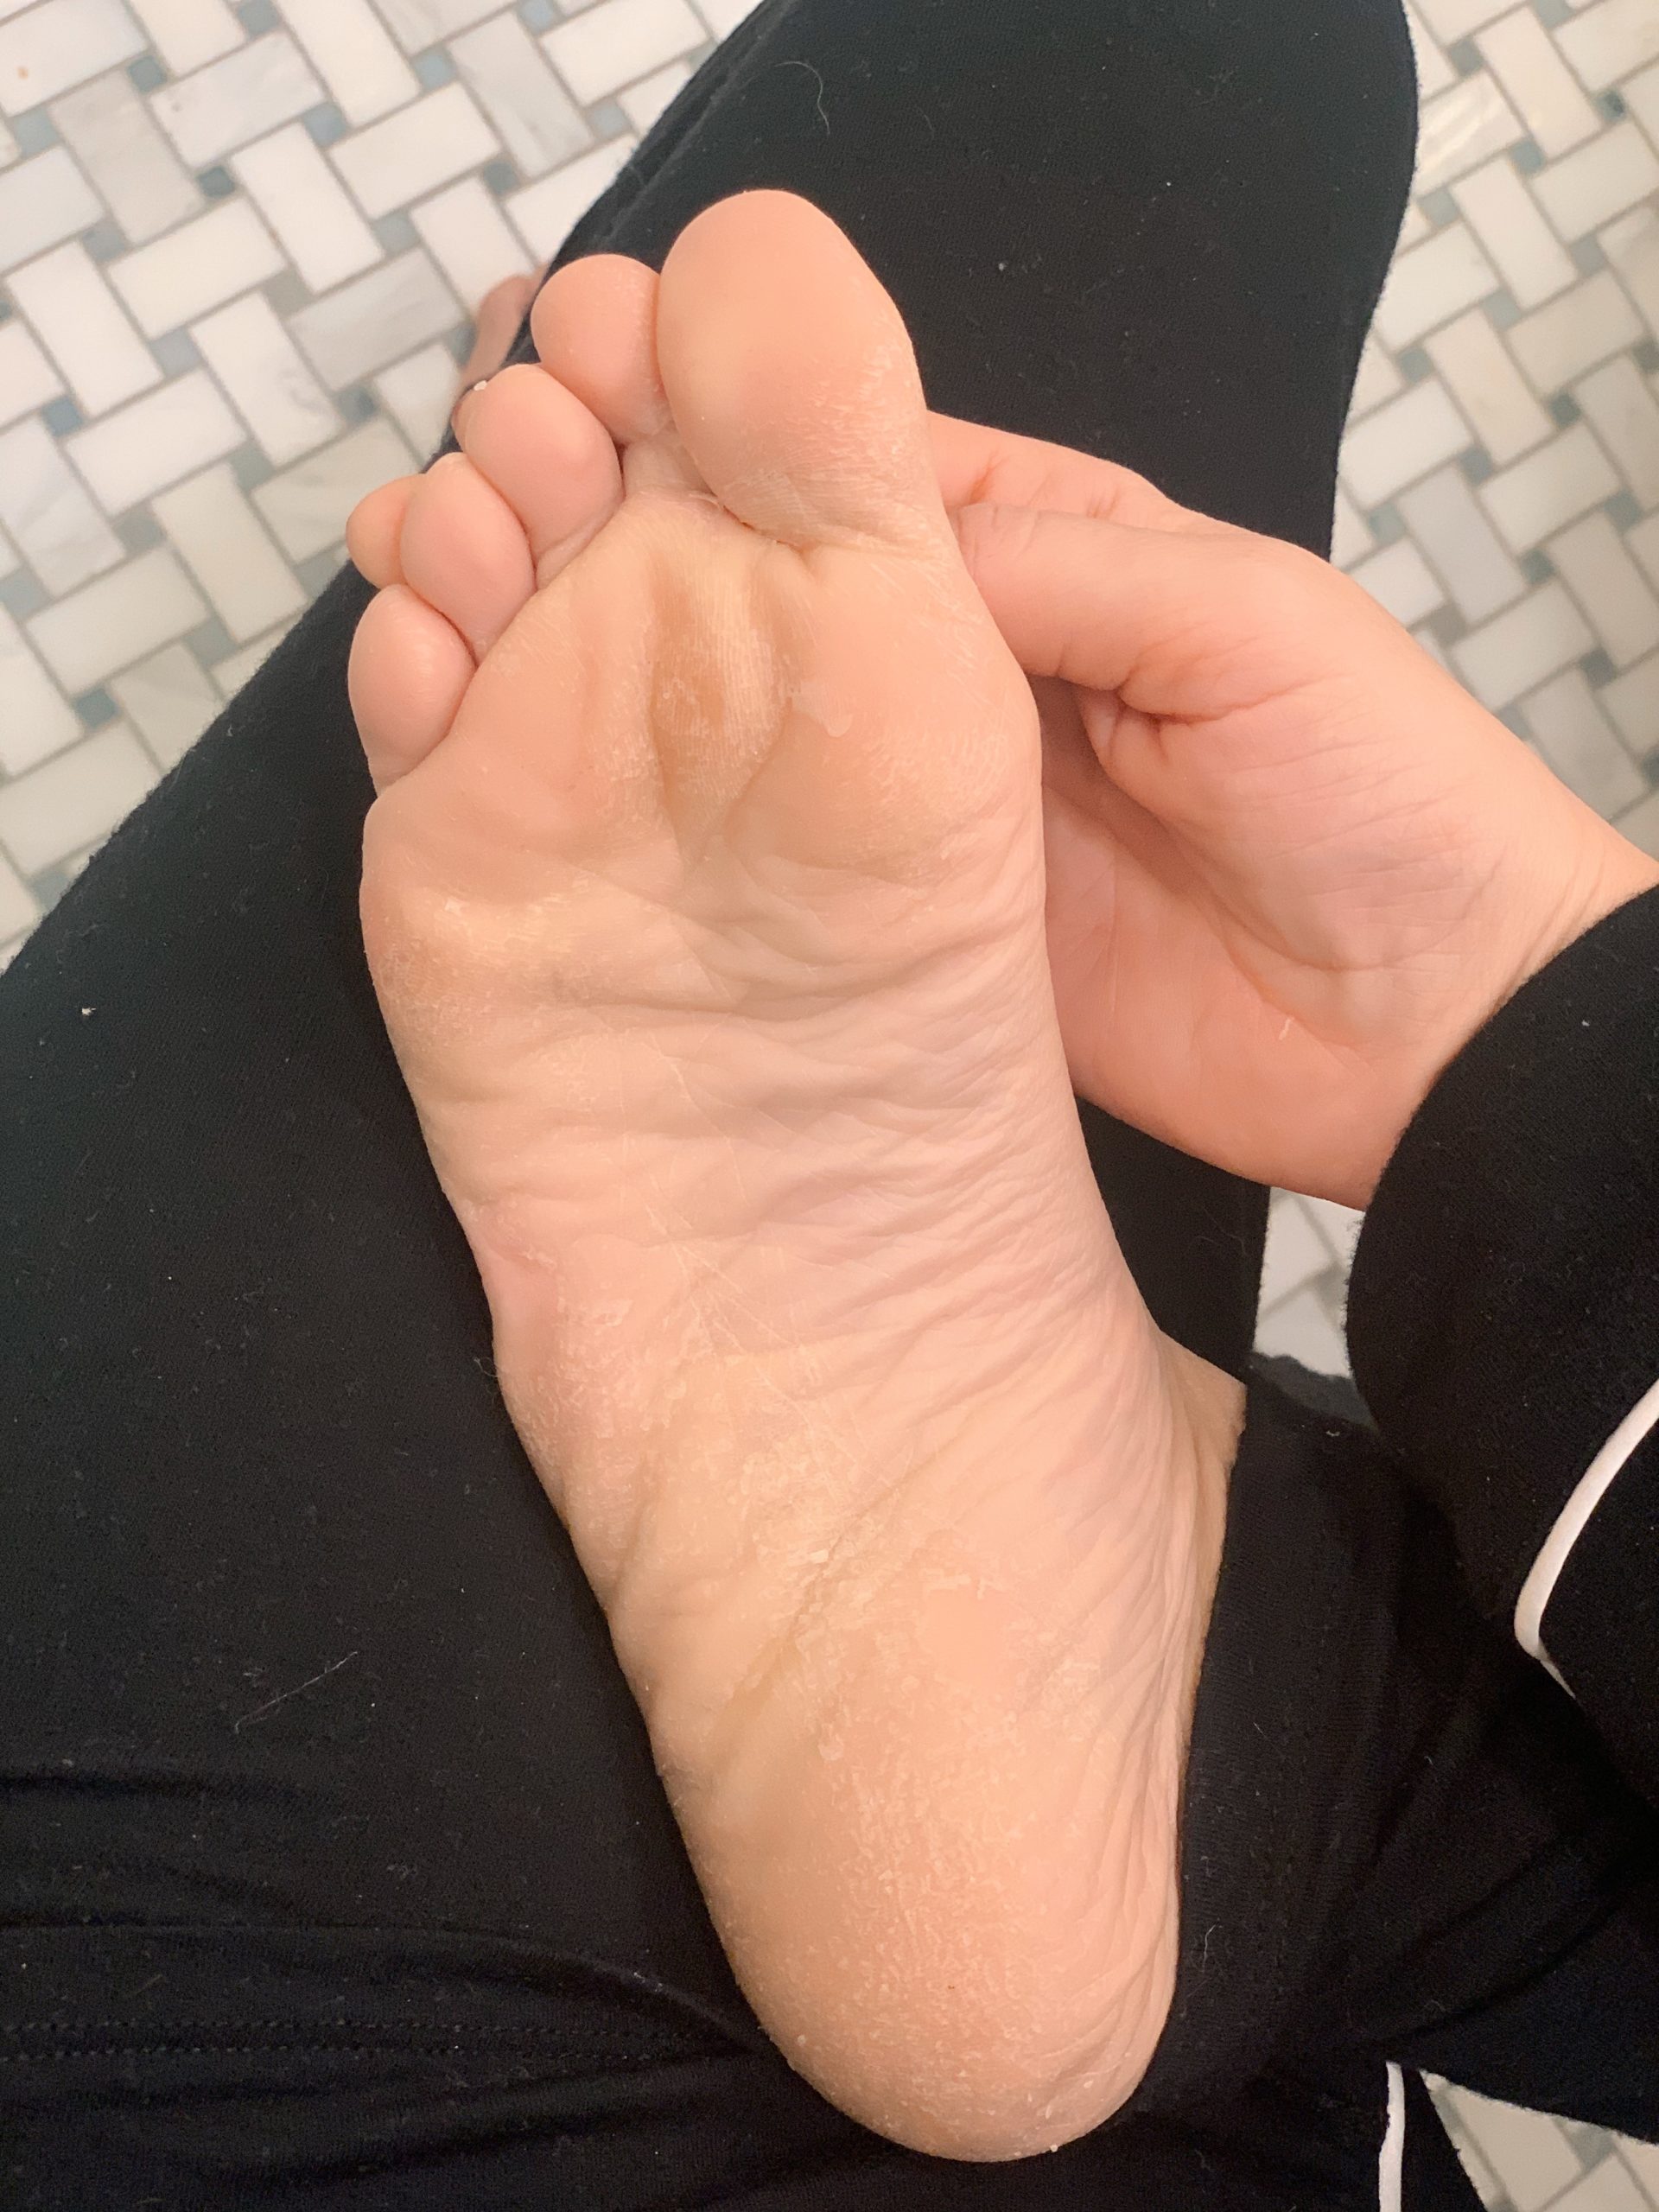 Before and after using foot wand! The results speak for themselves